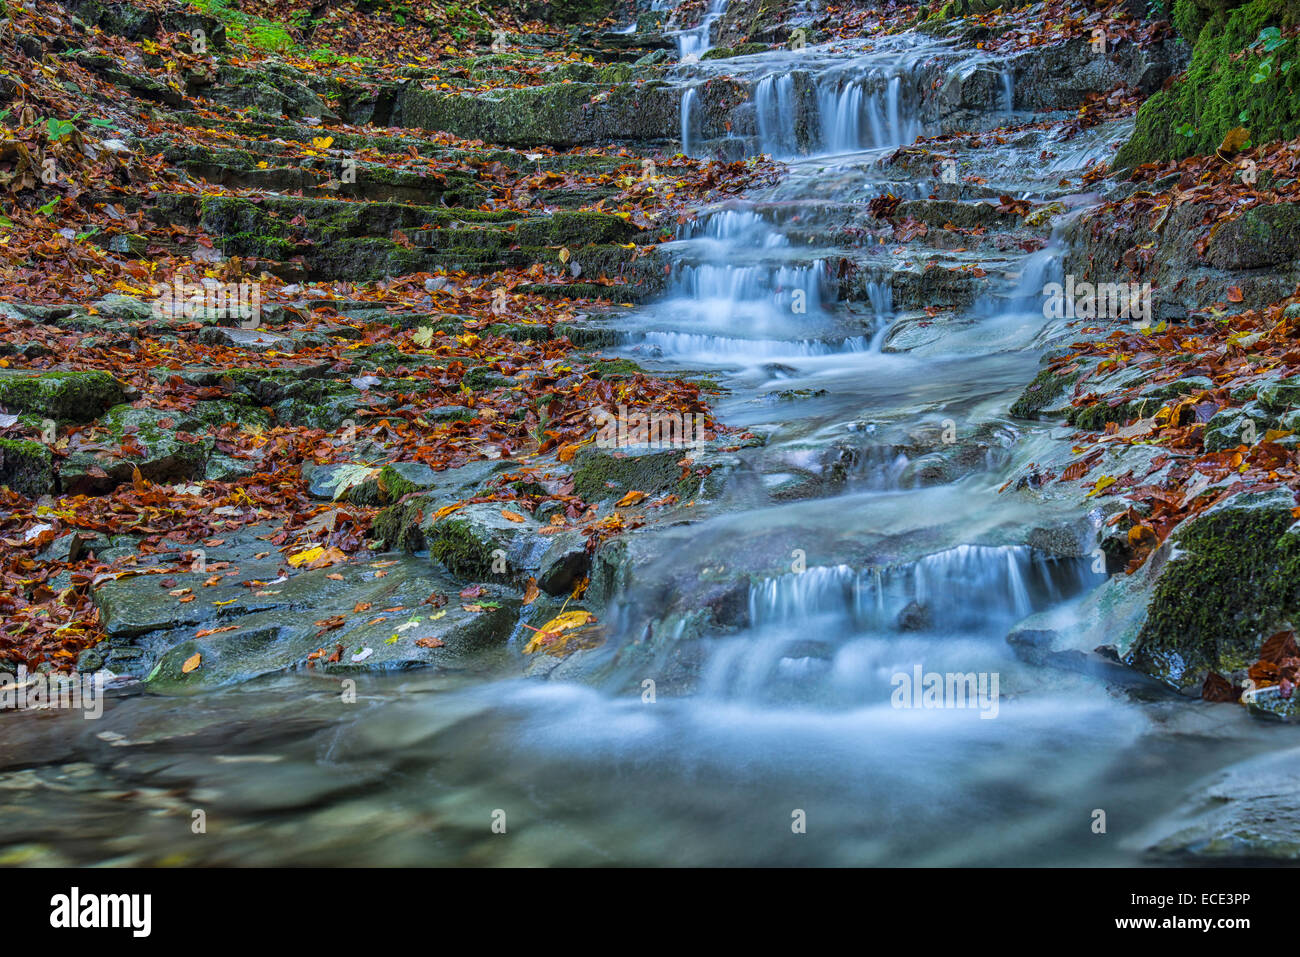 Waterfall in the forest in autumn, Monte Cucco Regional Park, Umbria, Italy Stock Photo